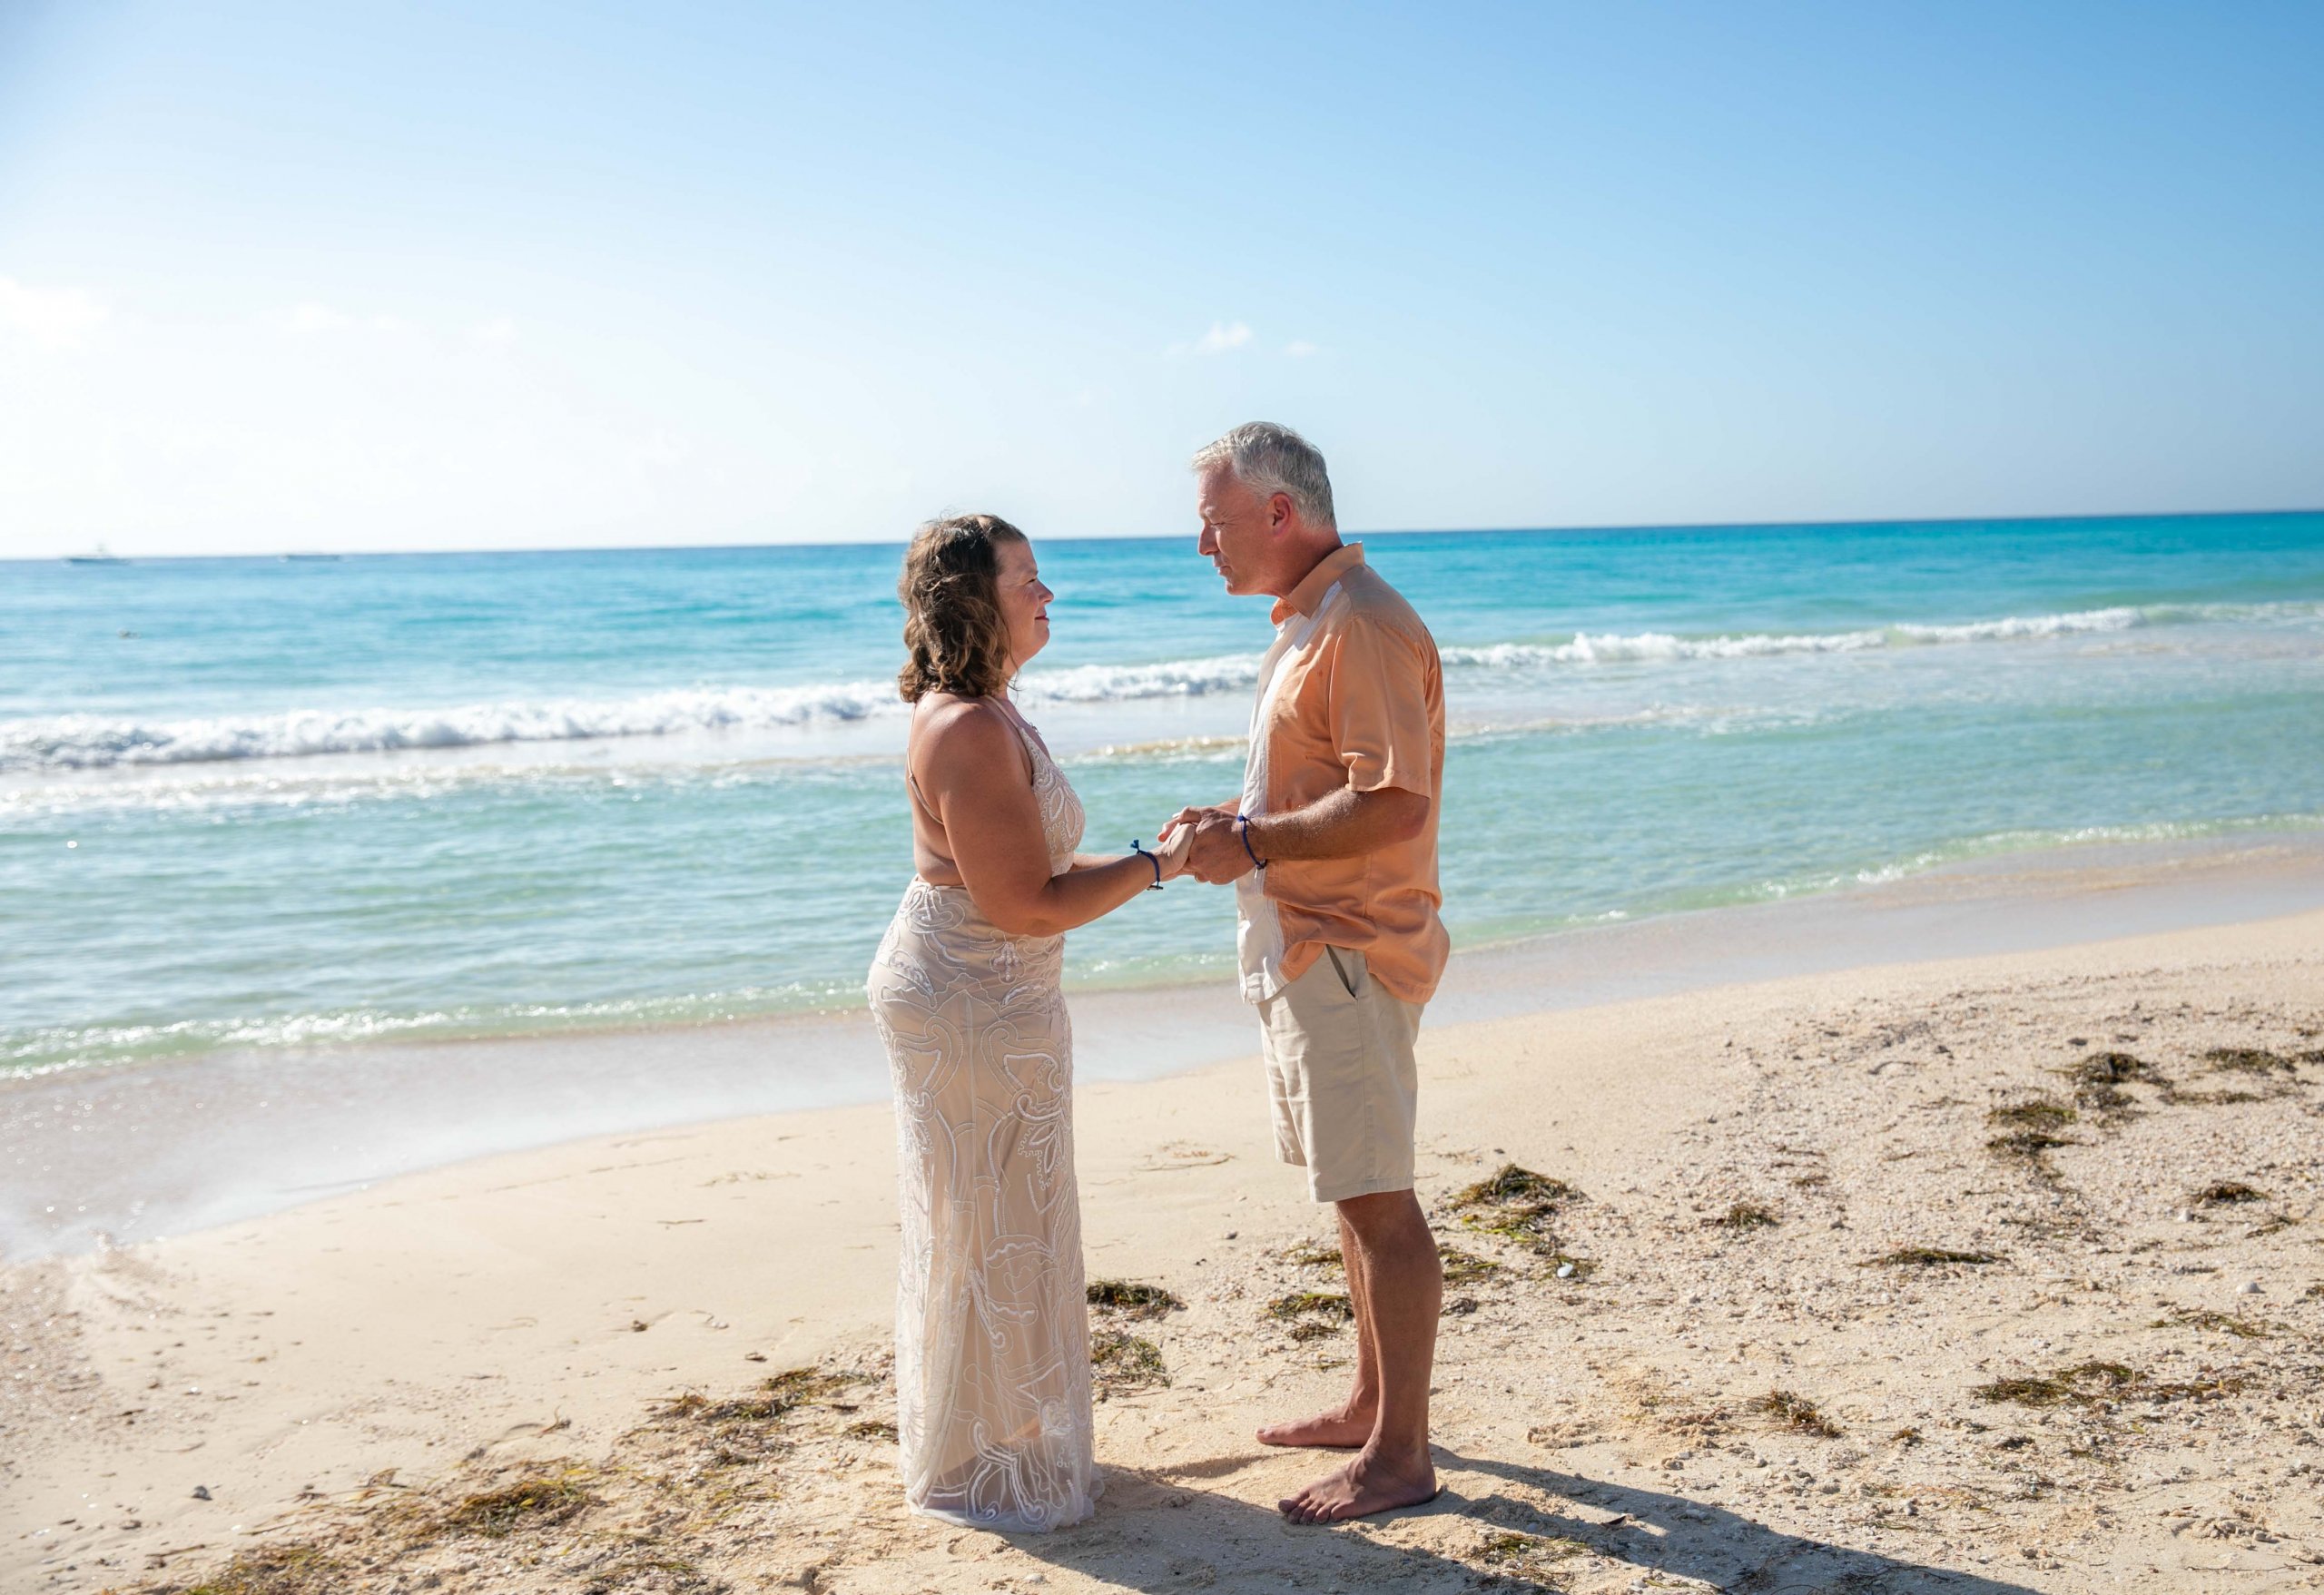 Top 5 Locations for Vow Renewals in Riviera Maya, Mexico